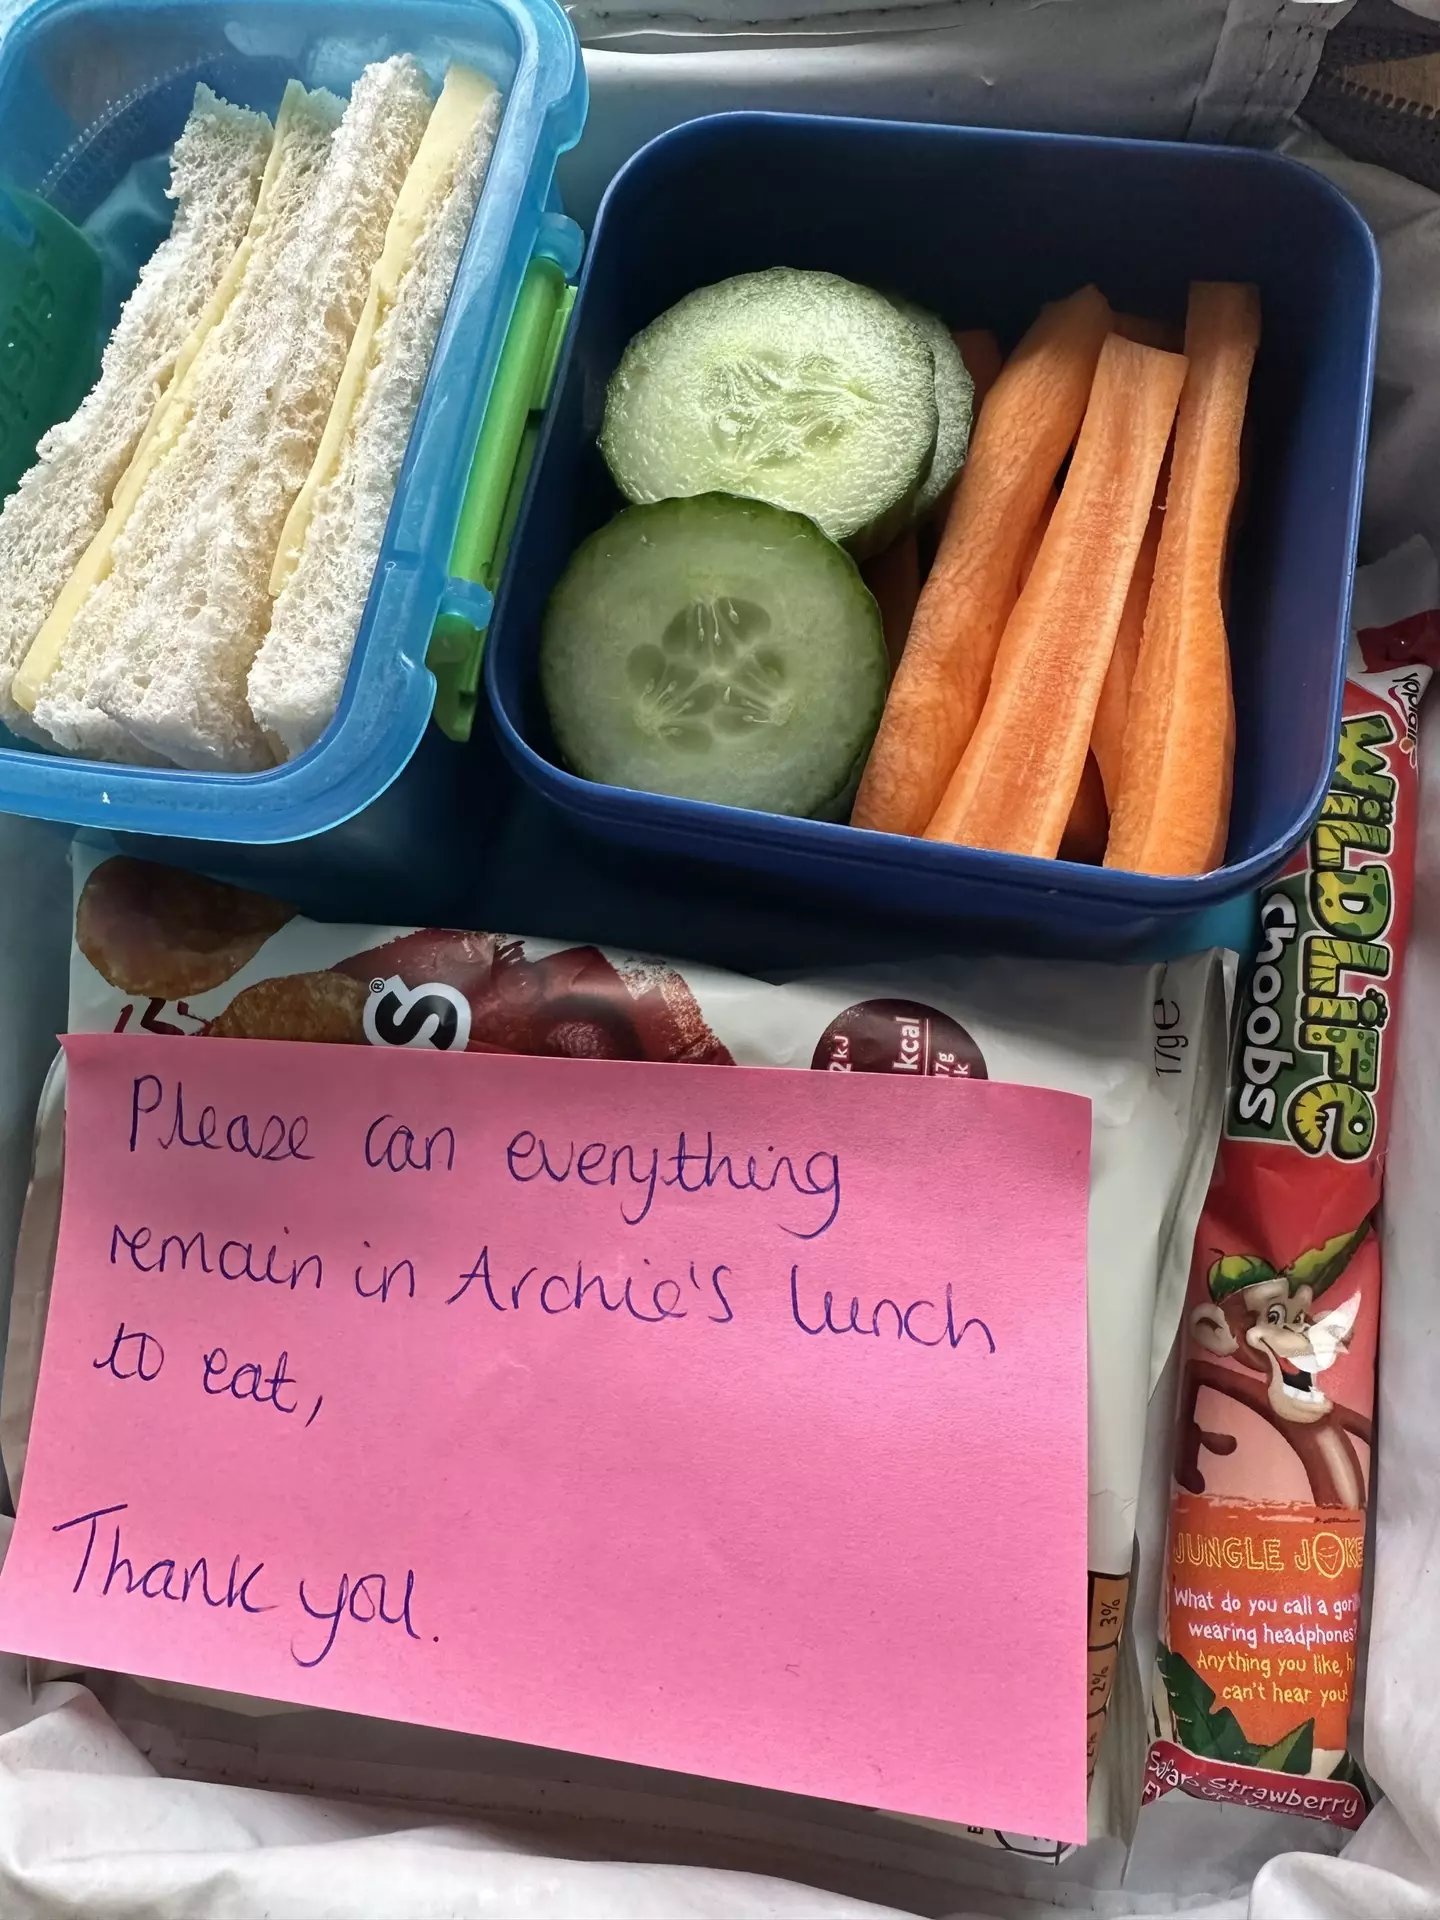 The mum returned the favour with her own note.